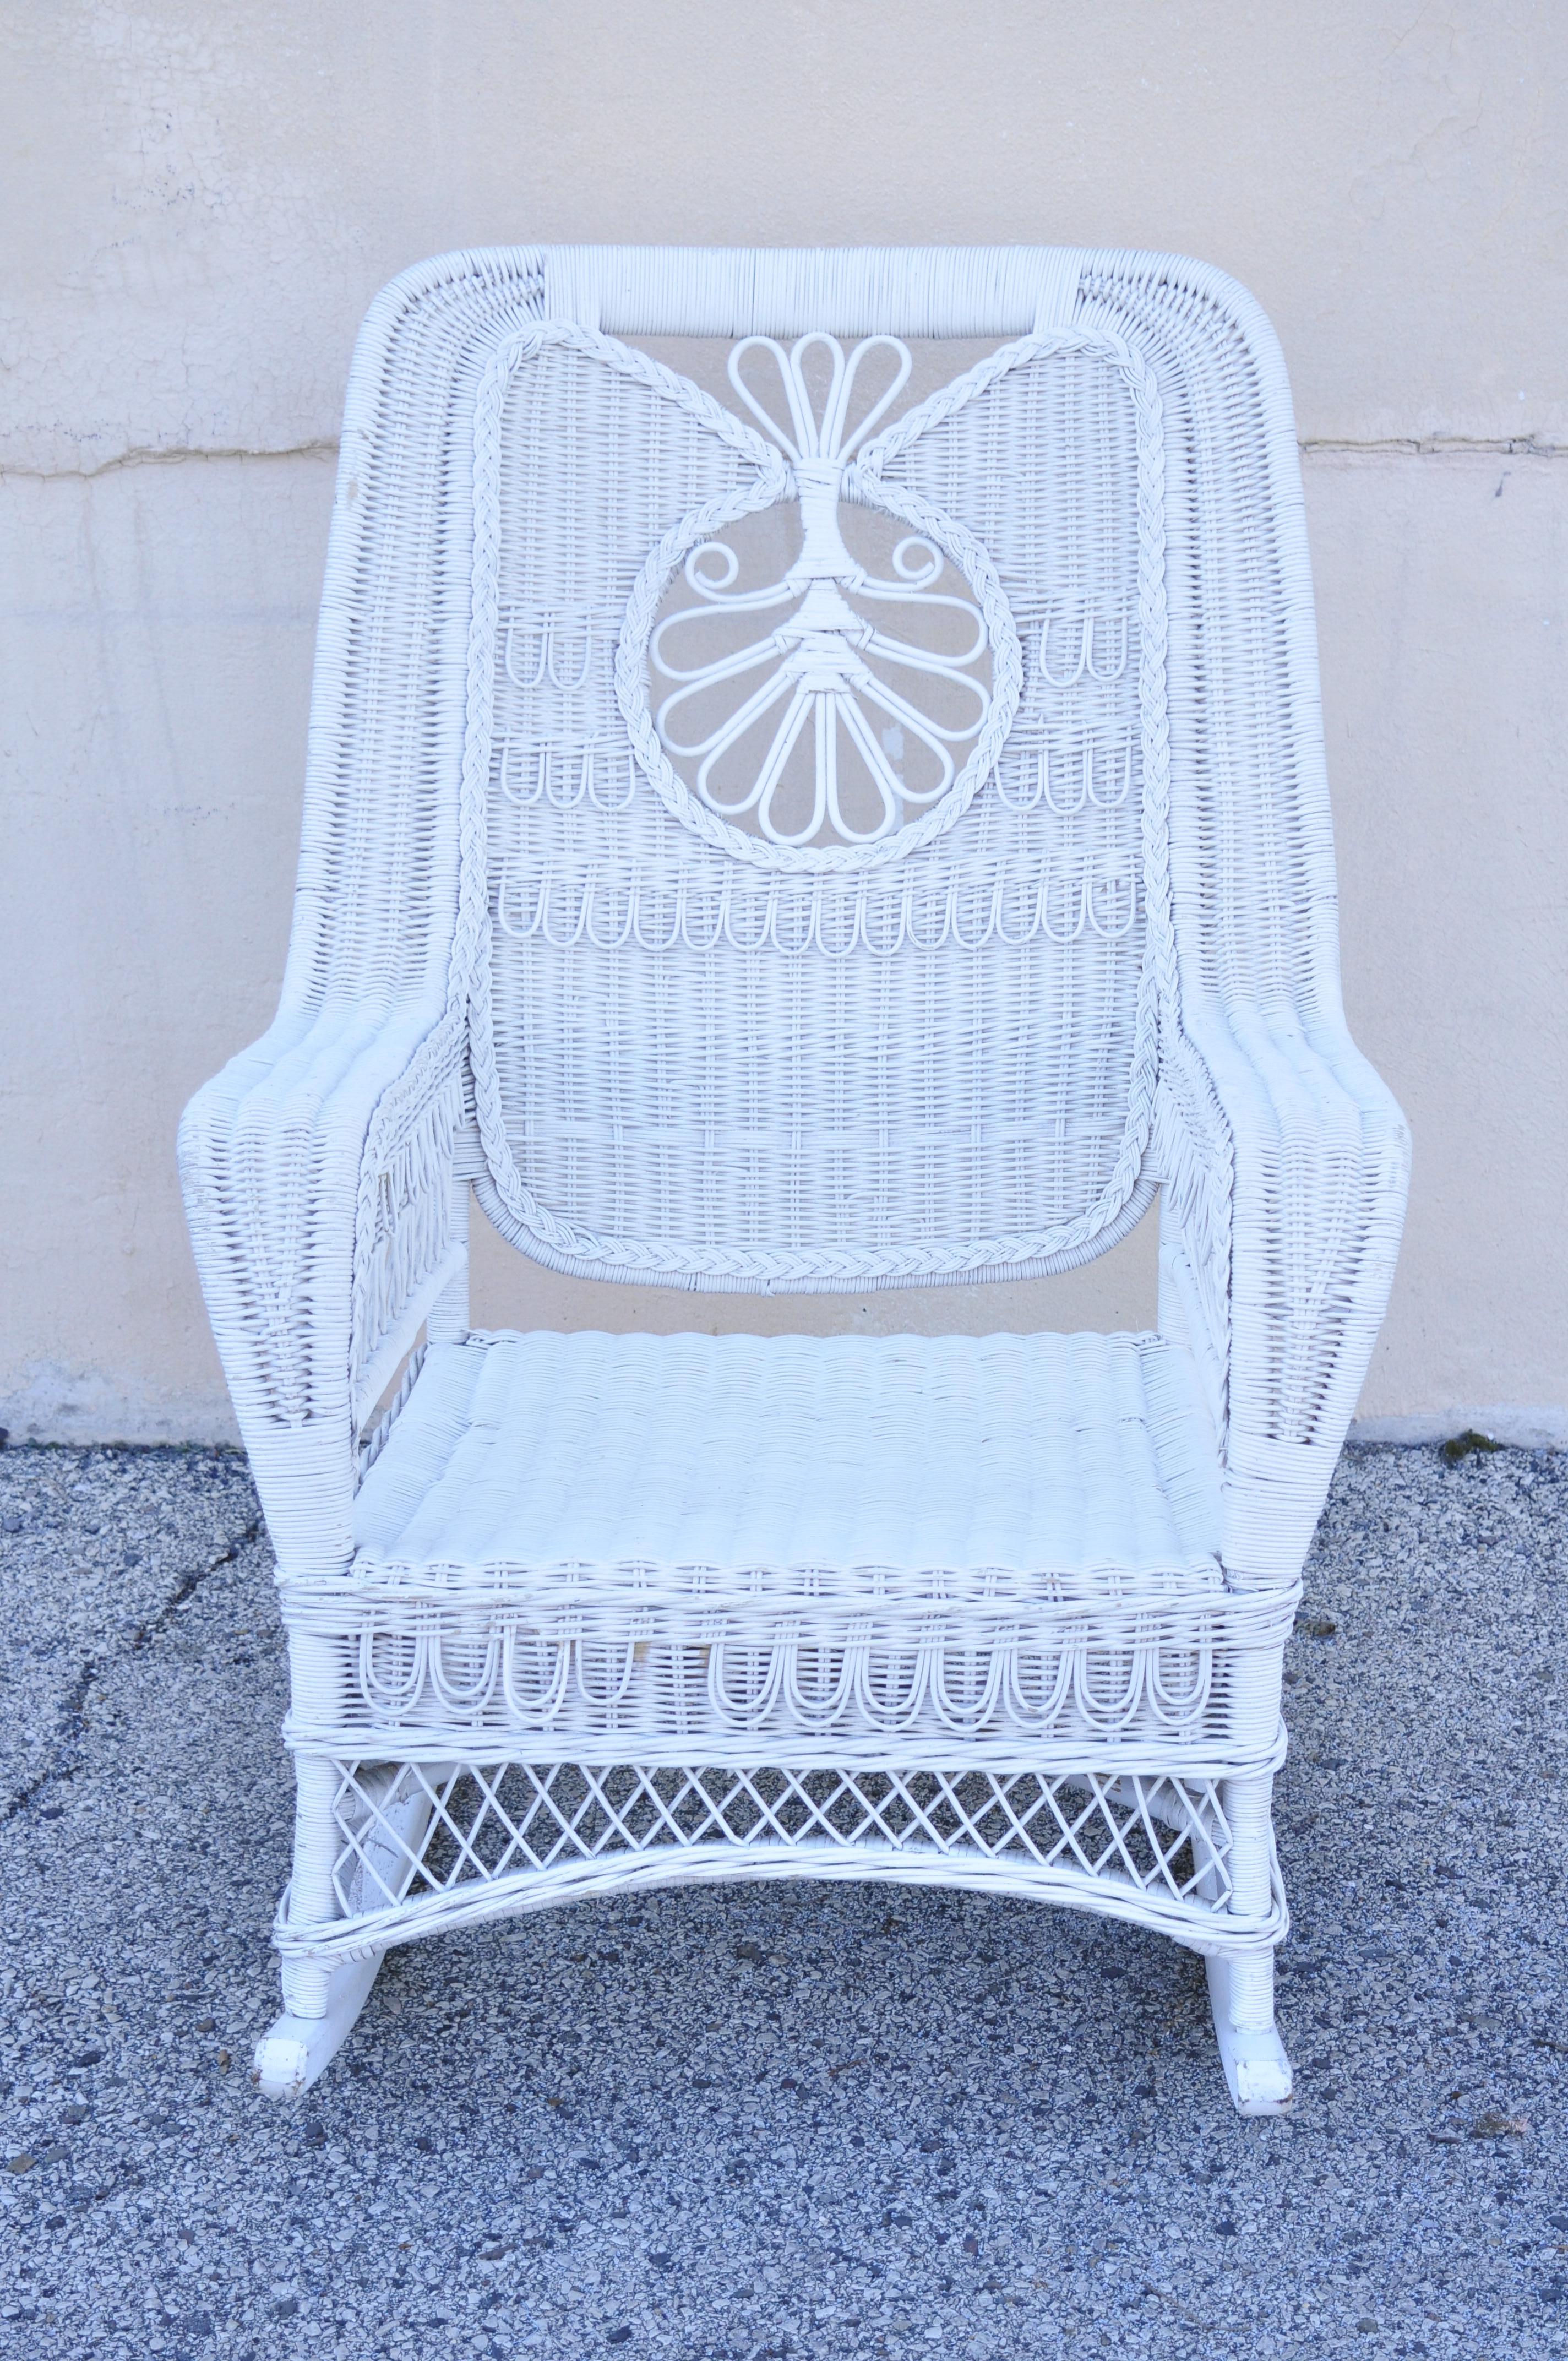 Vintage Oversize White Victorian Style Wicker Rattan Rocking Chair Lounge Chair 7